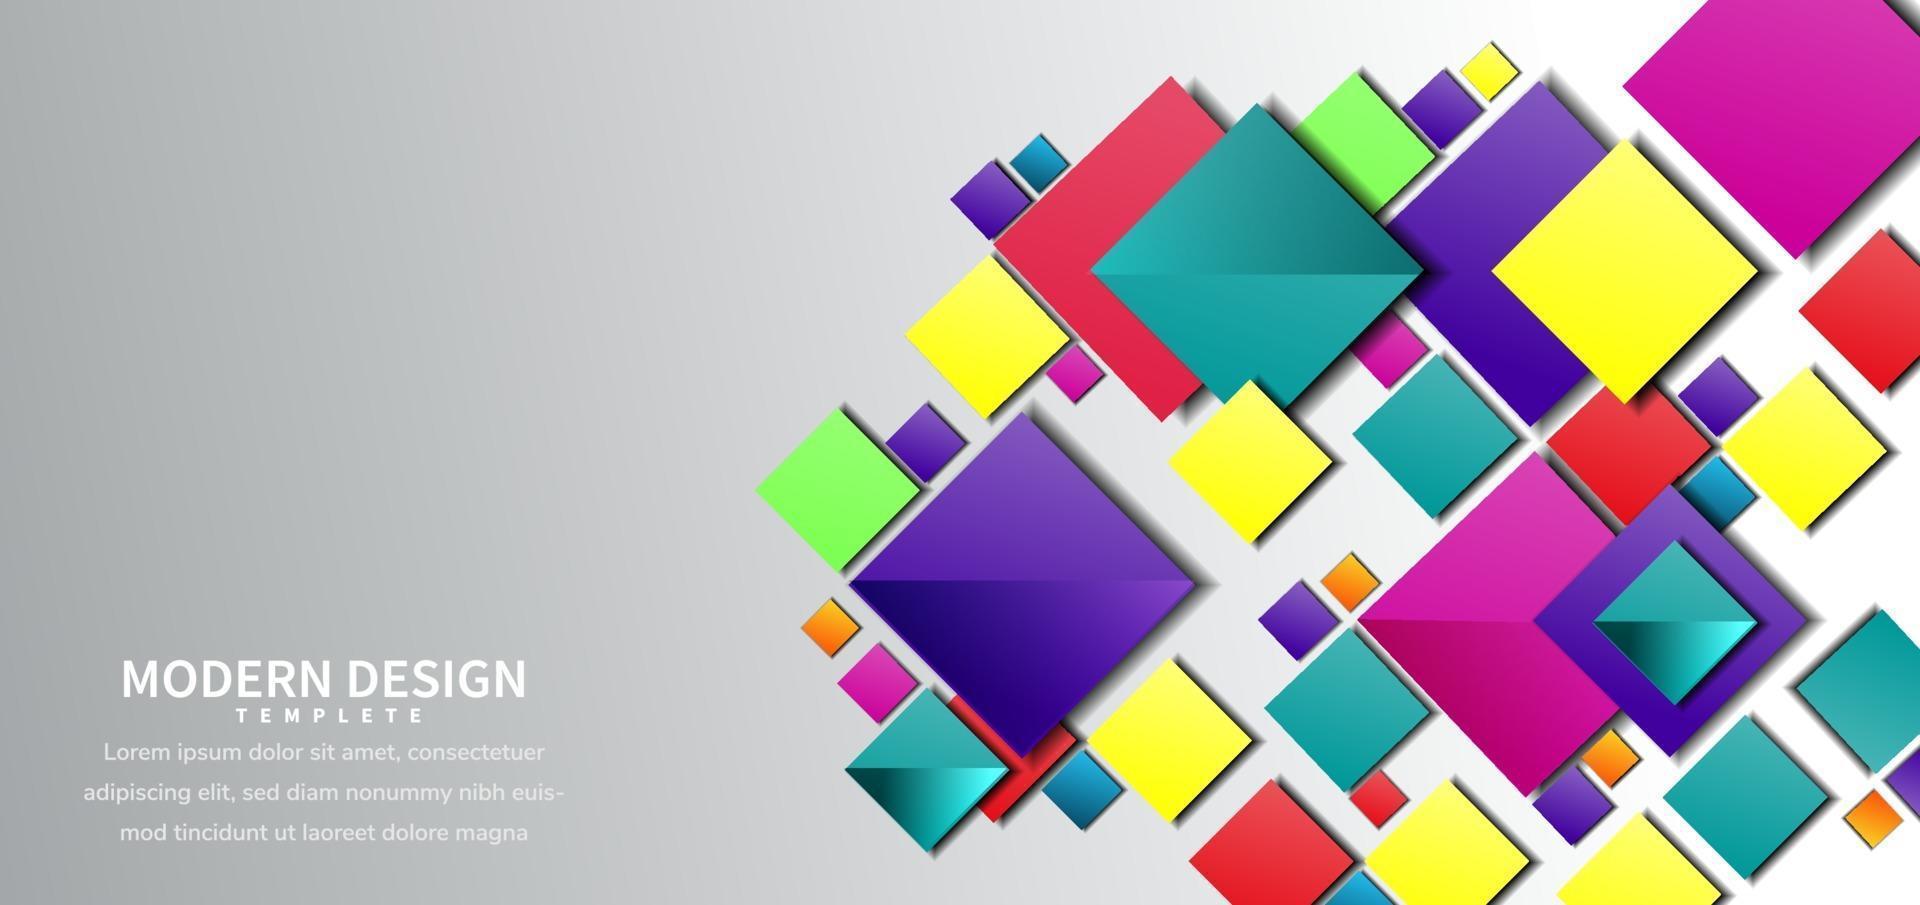 Abstract squares overlapping colorful design on grey background